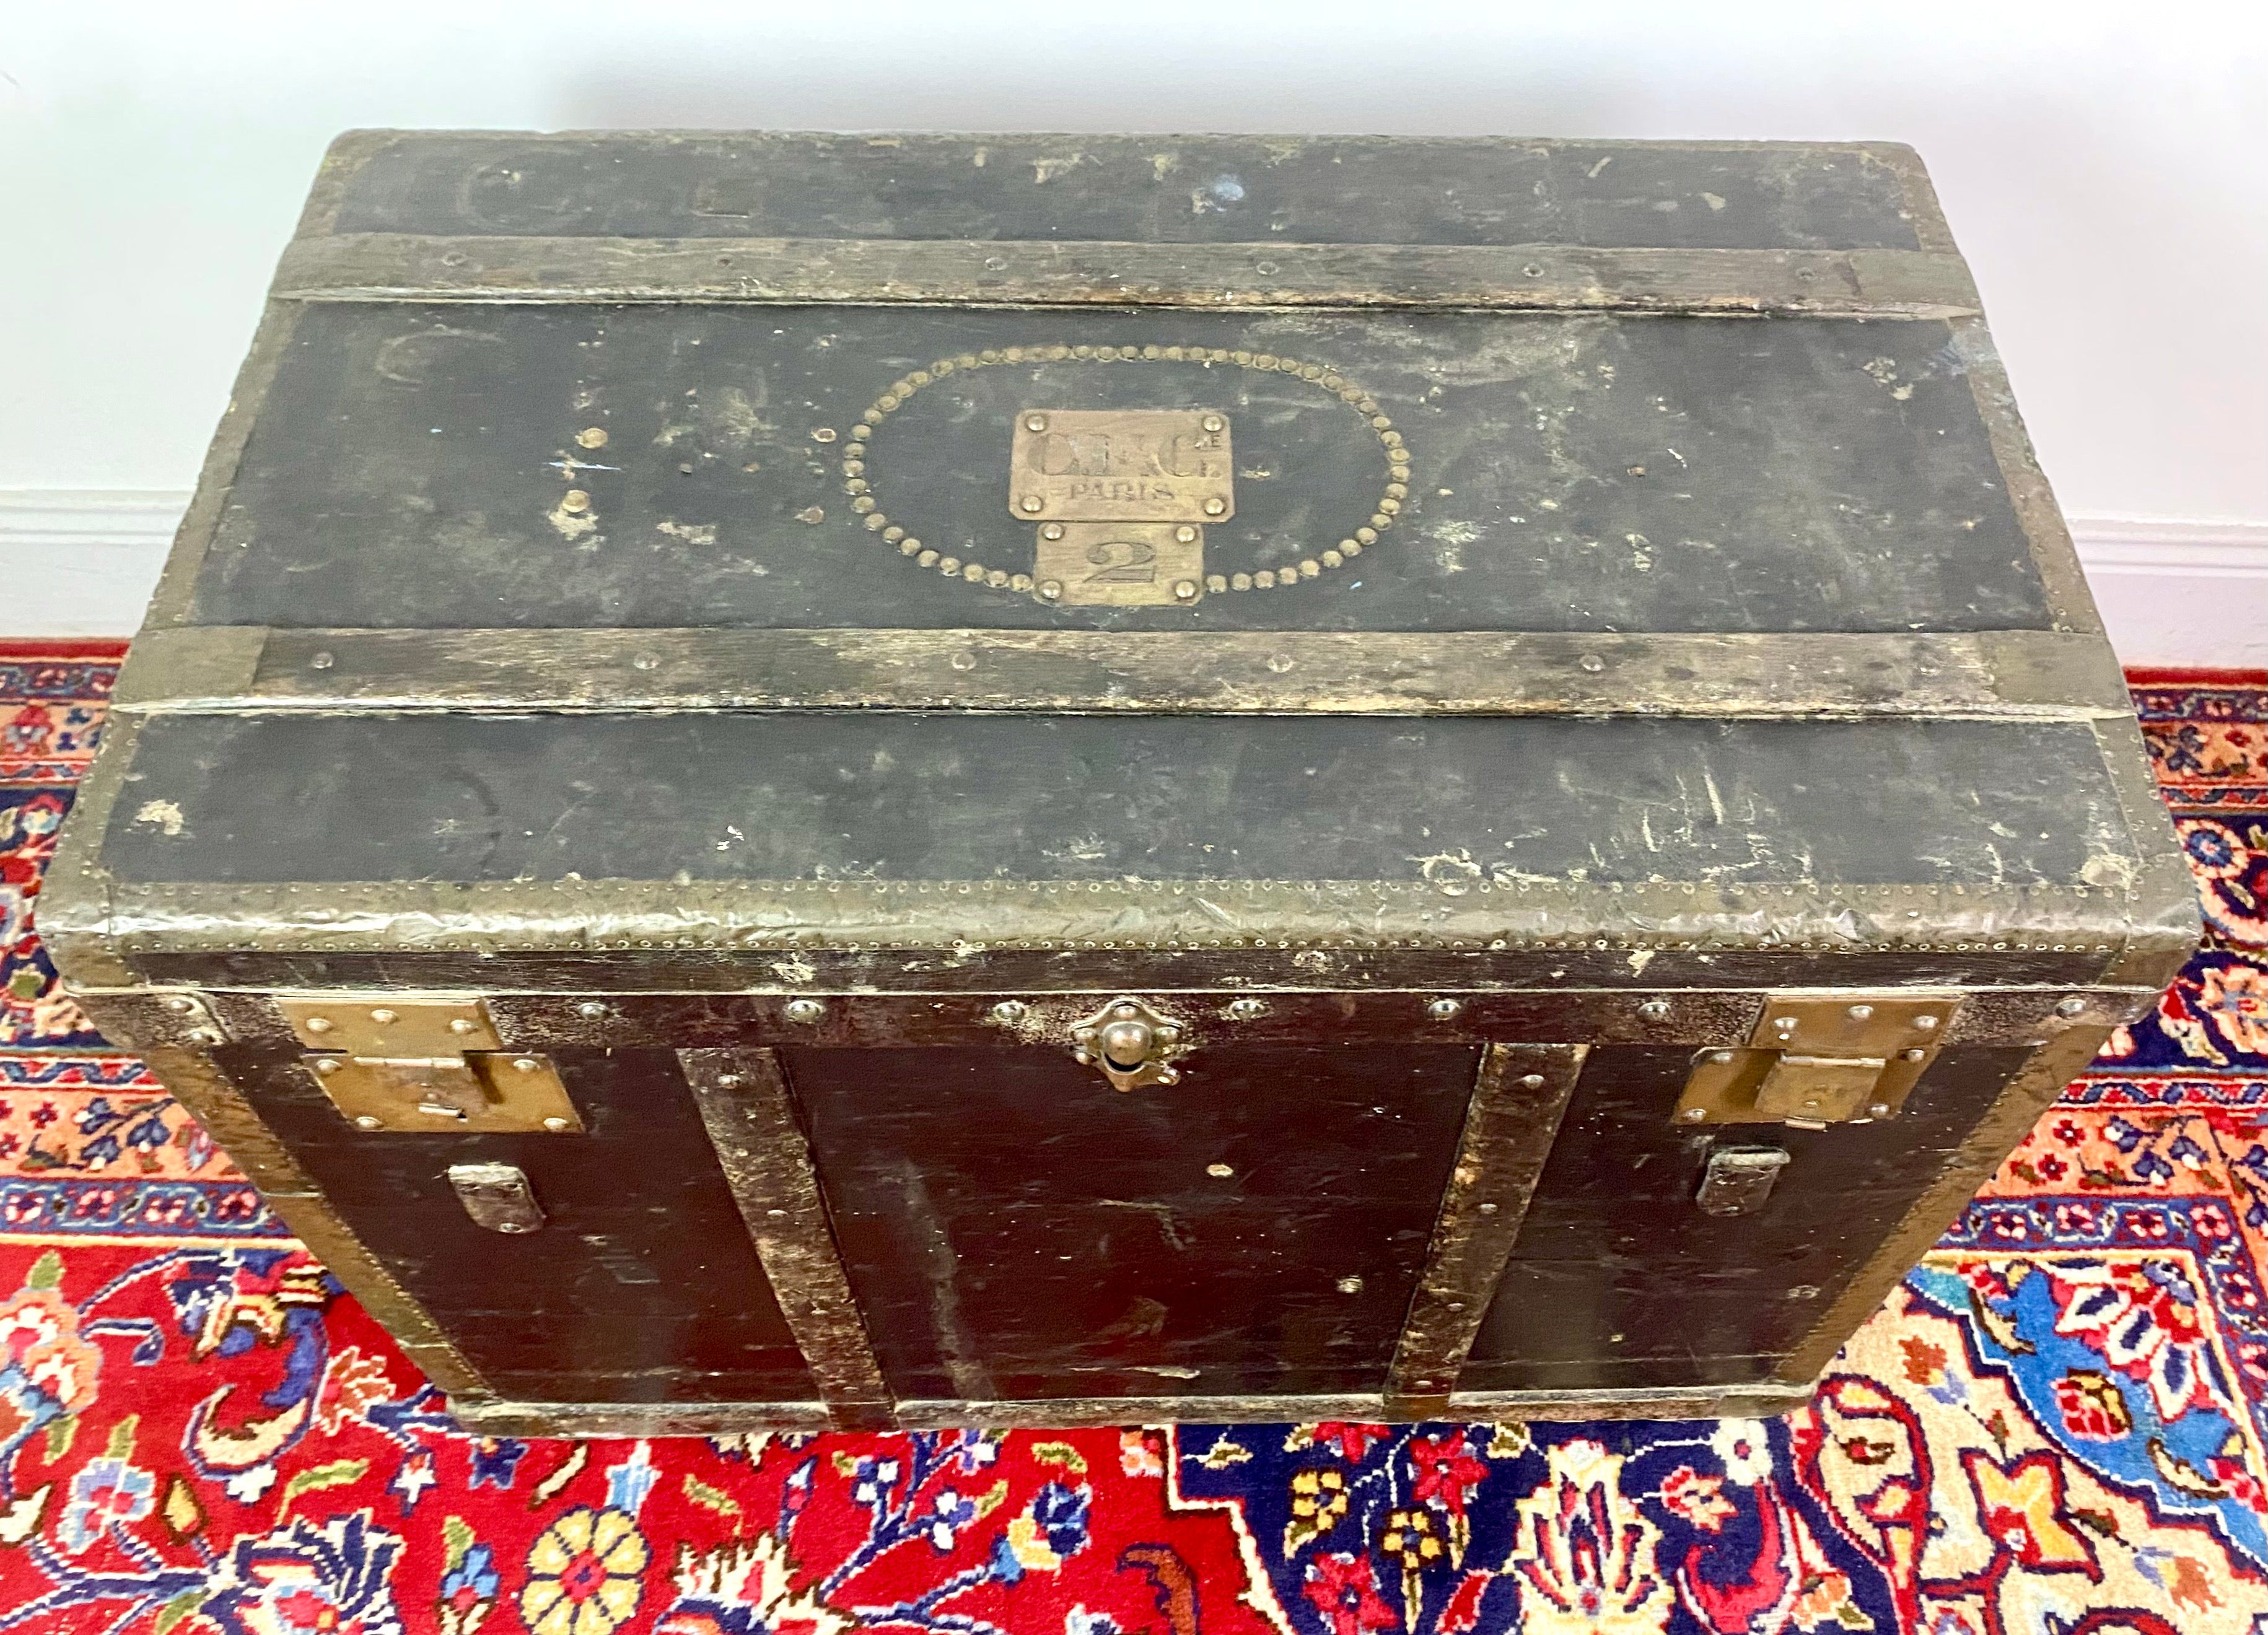 Very fine late 19th century travel trunk in wood, brass, black coated canvas and interior fabric by A. Maille-Lavolaille.
This superb trunk bears a plate monogrammed 